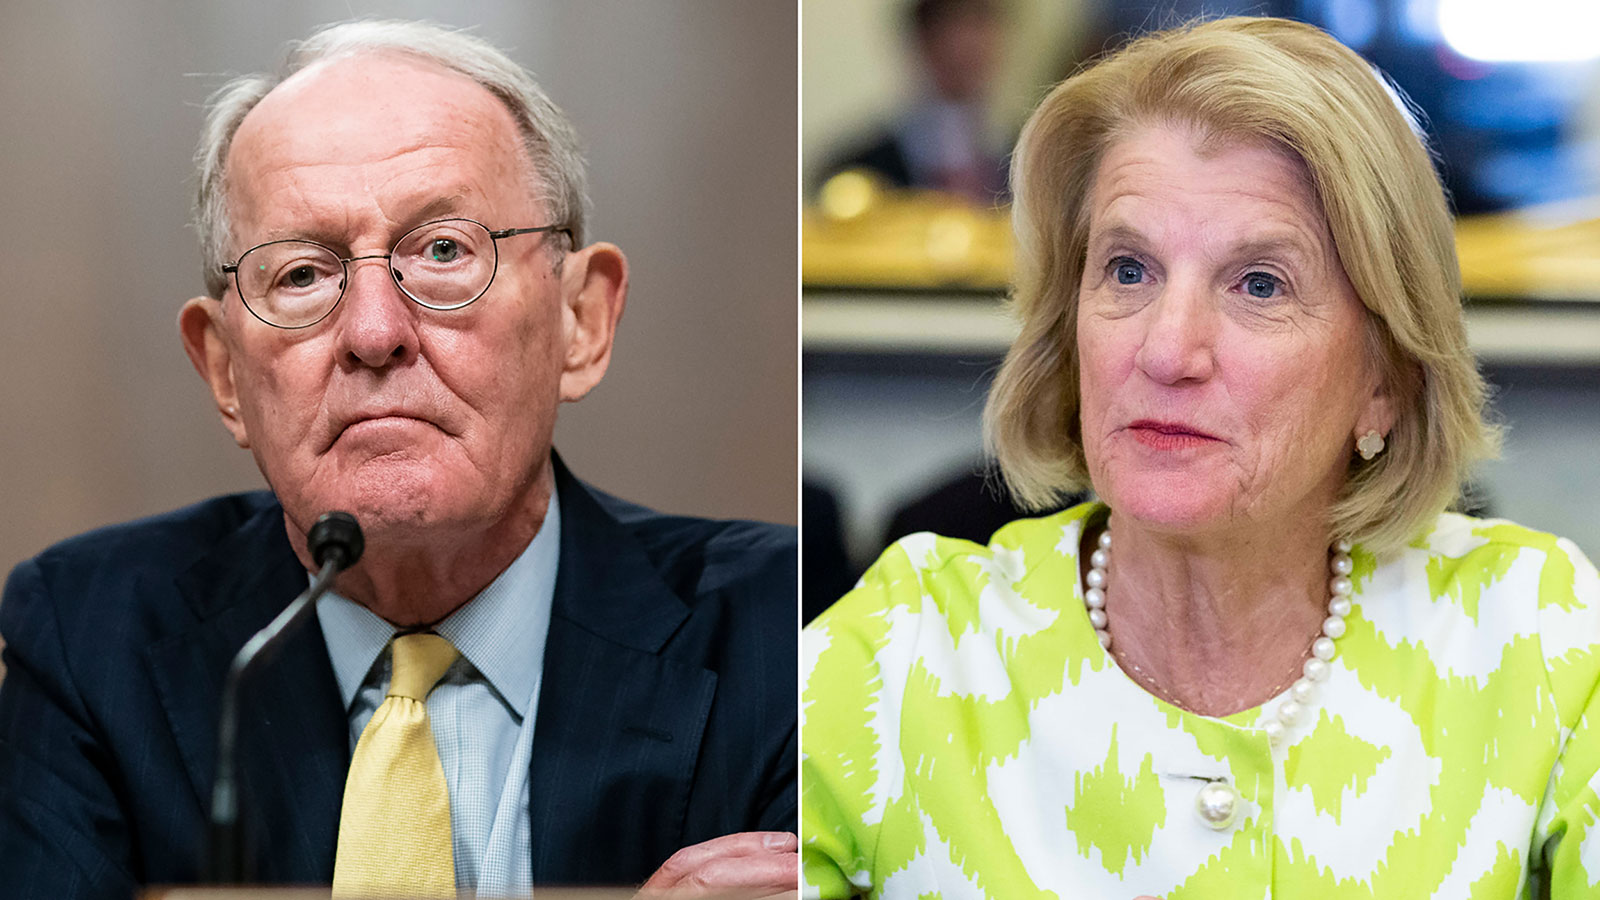 From left, Sens. Lamar Alexander of Tennessee and Shelley Moore Capito of West Virginia.